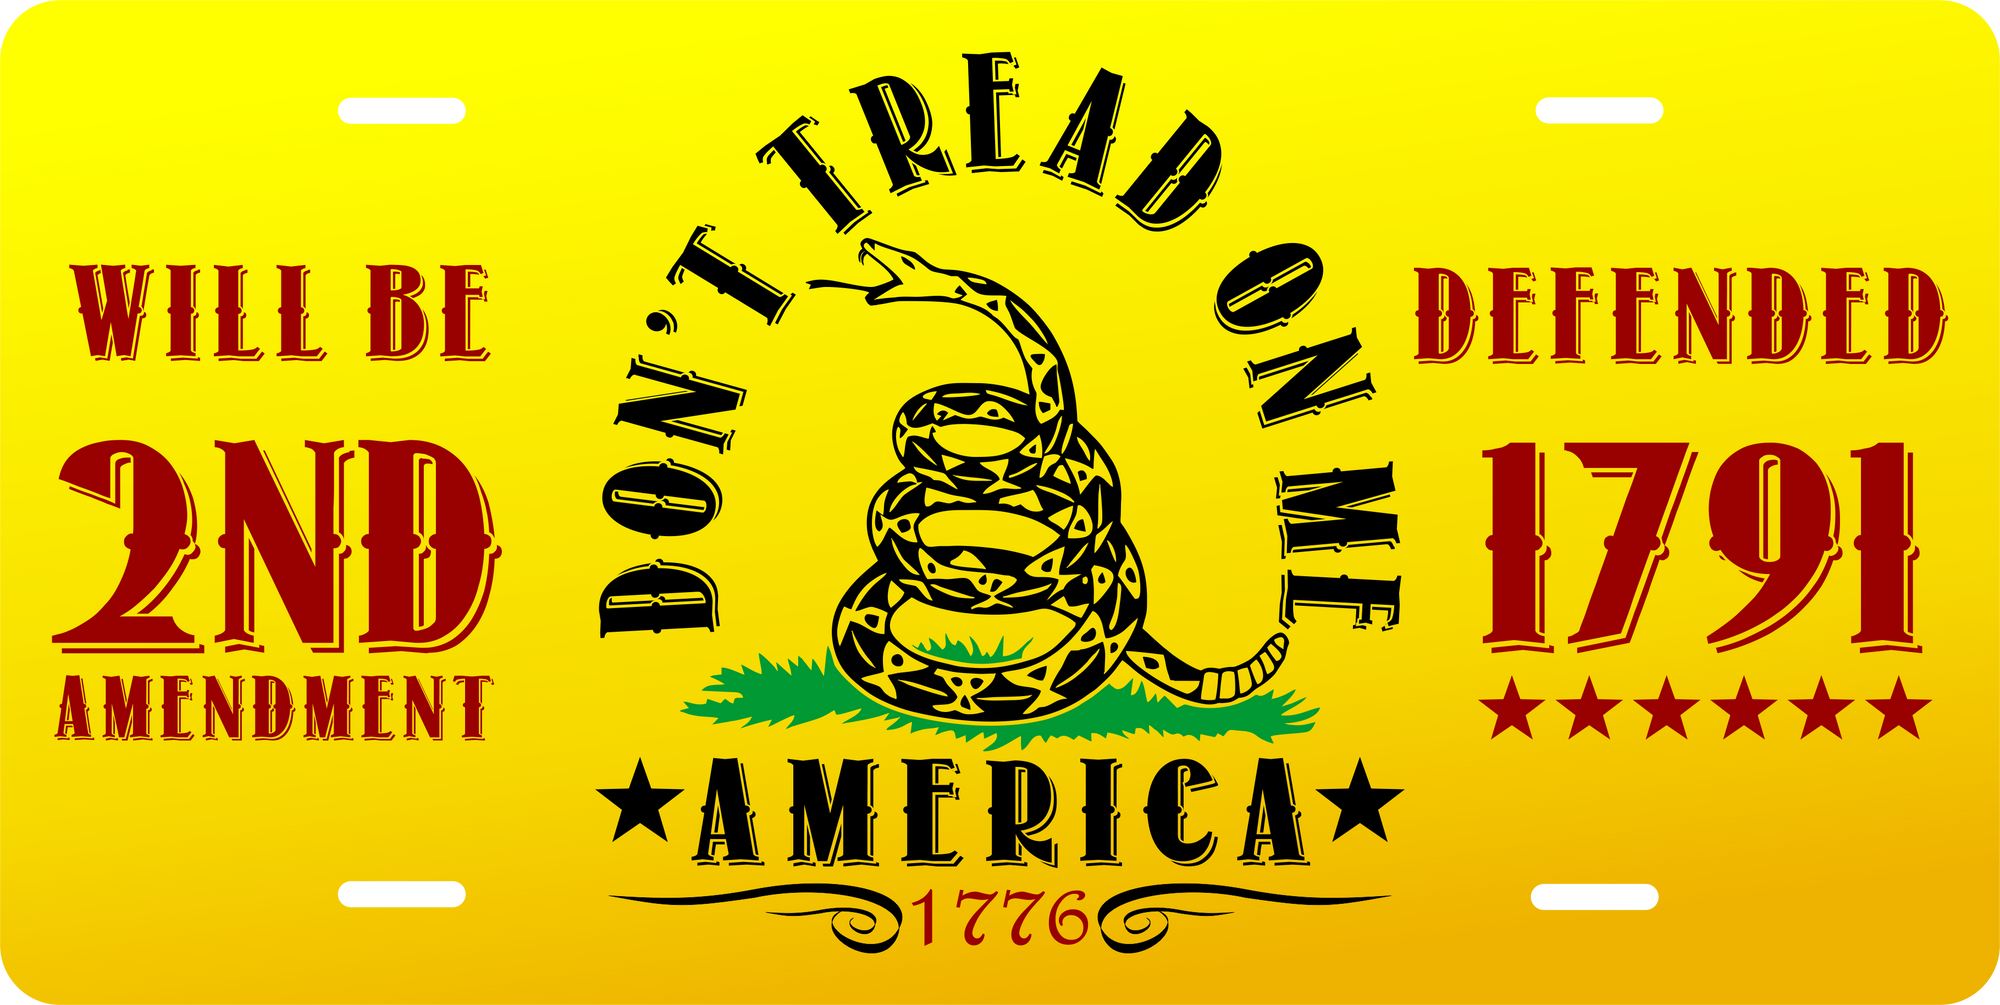 Don't Tread On Me 2nd Amendment License Plate | Grit Style Gear